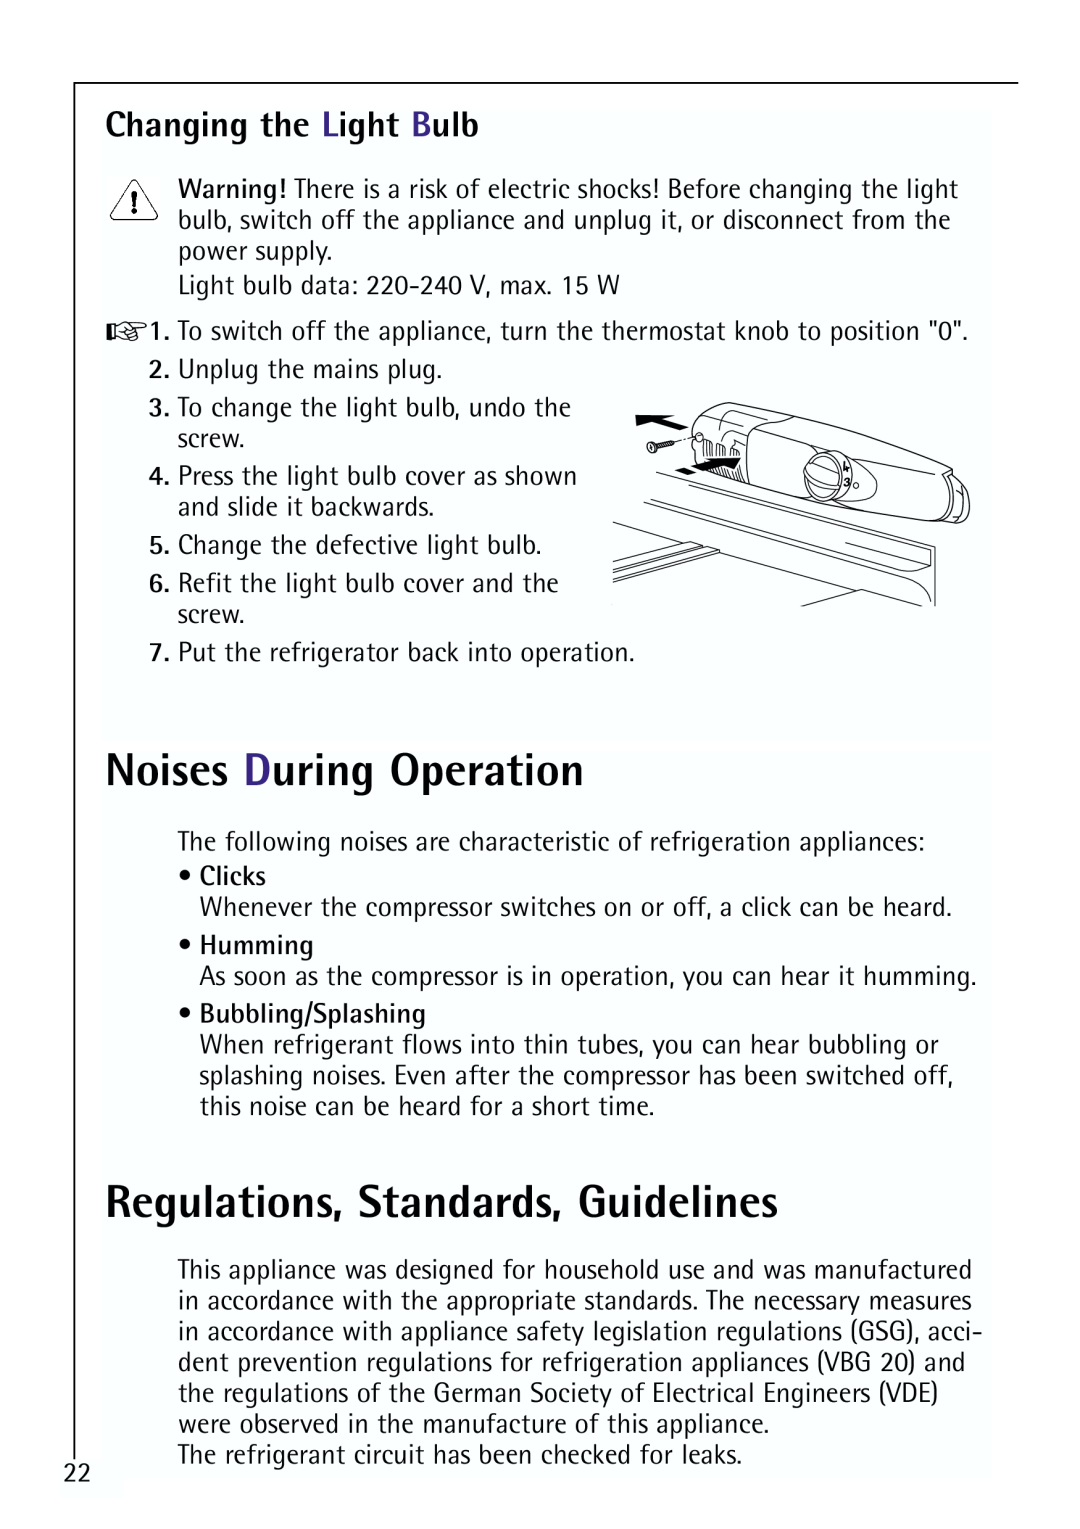 Electrolux 64150 TK Noises During Operation, Regulations, Standards, Guidelines, Changing the Light Bulb, Clicks, Humming 